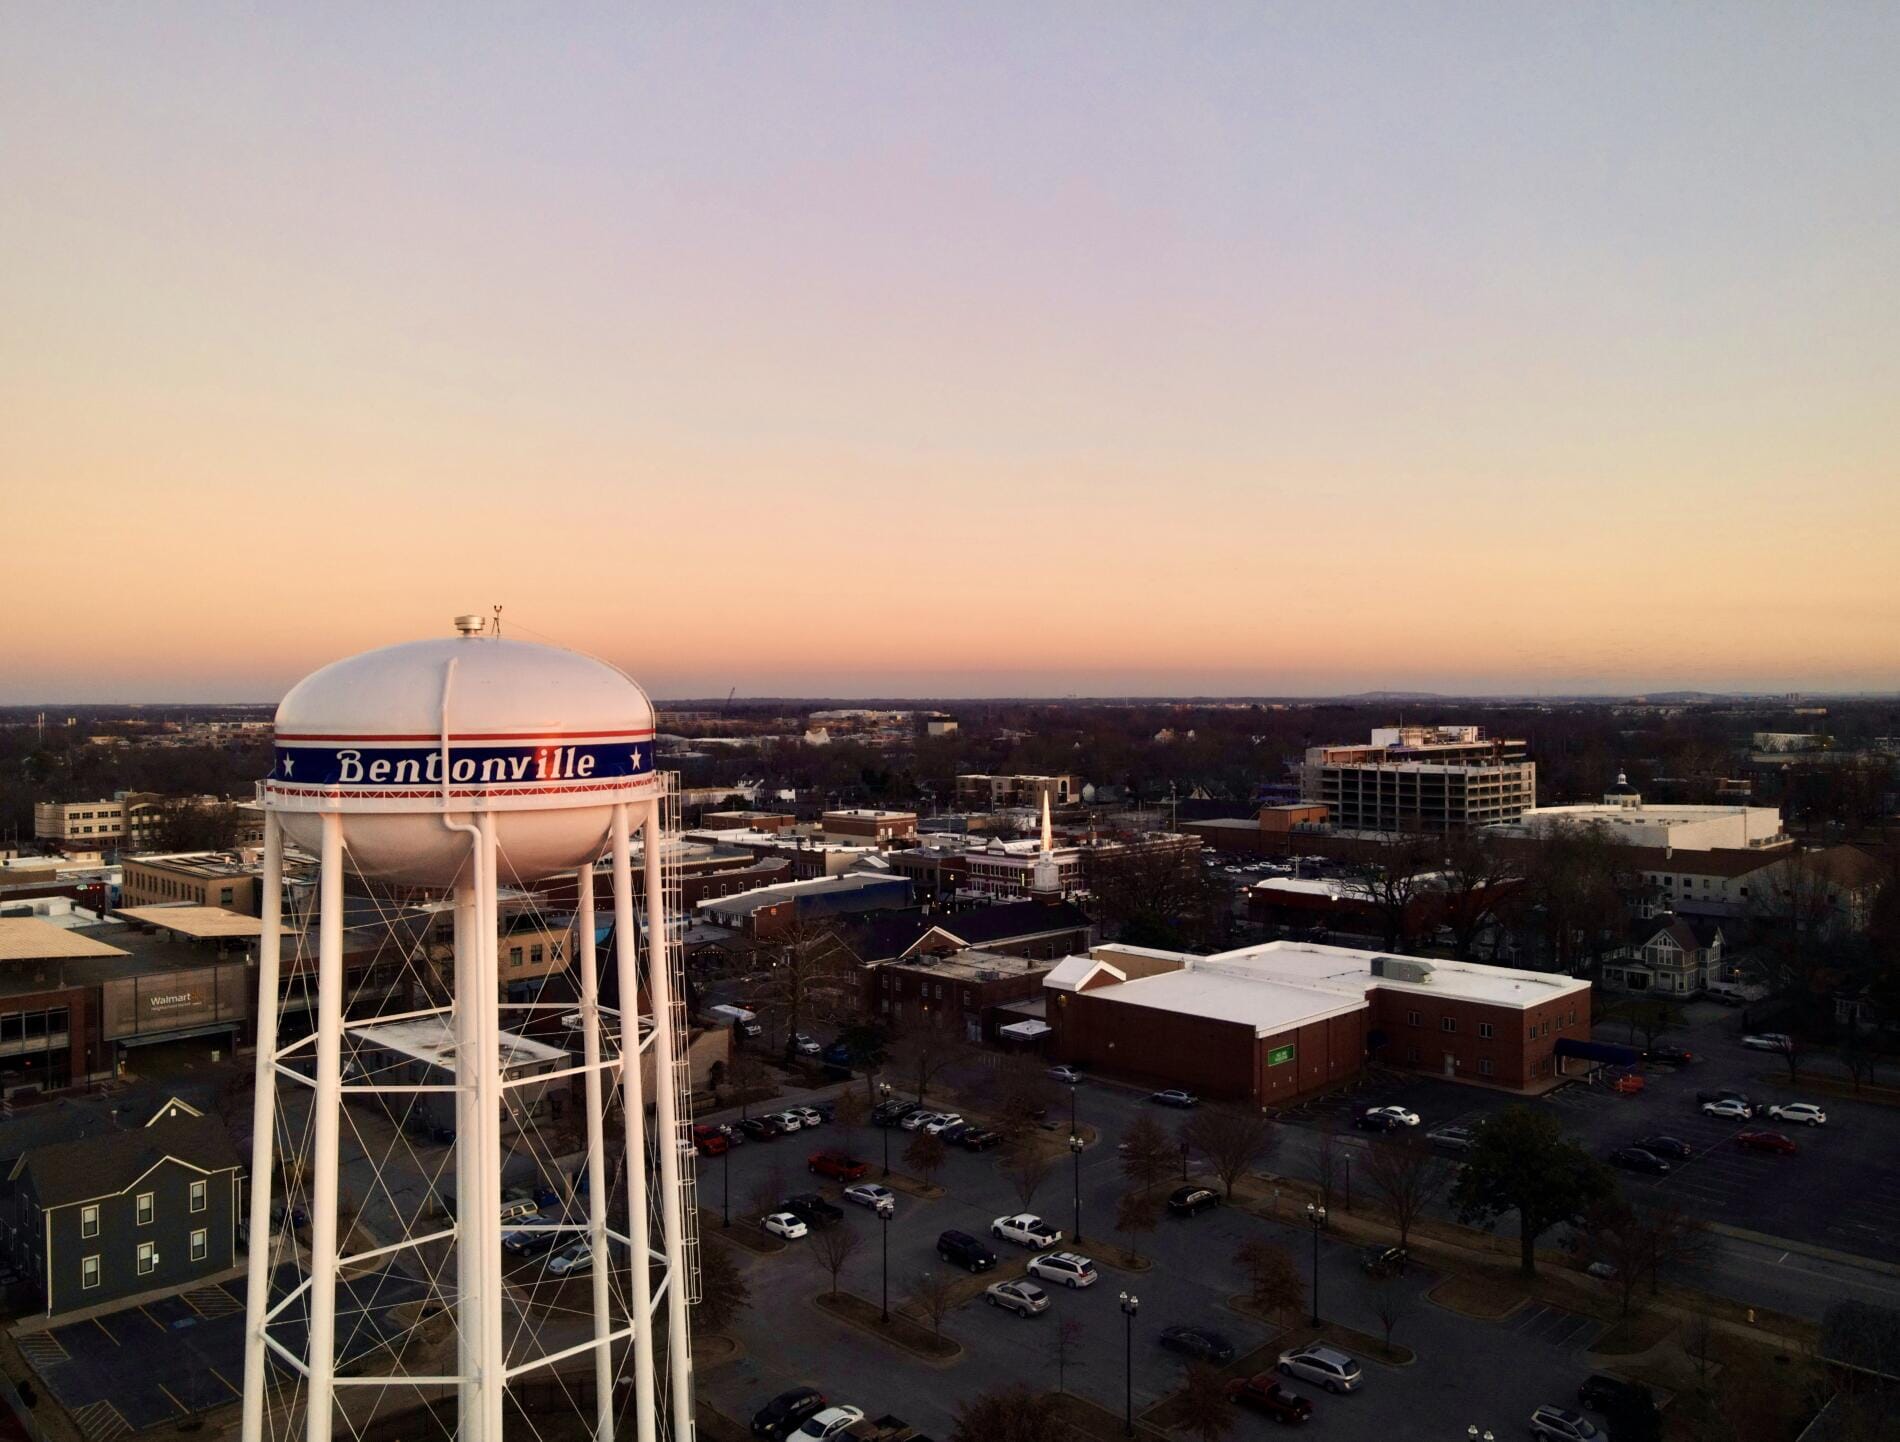 Drone shot of the famous water tower in Bentonville, Arkansas